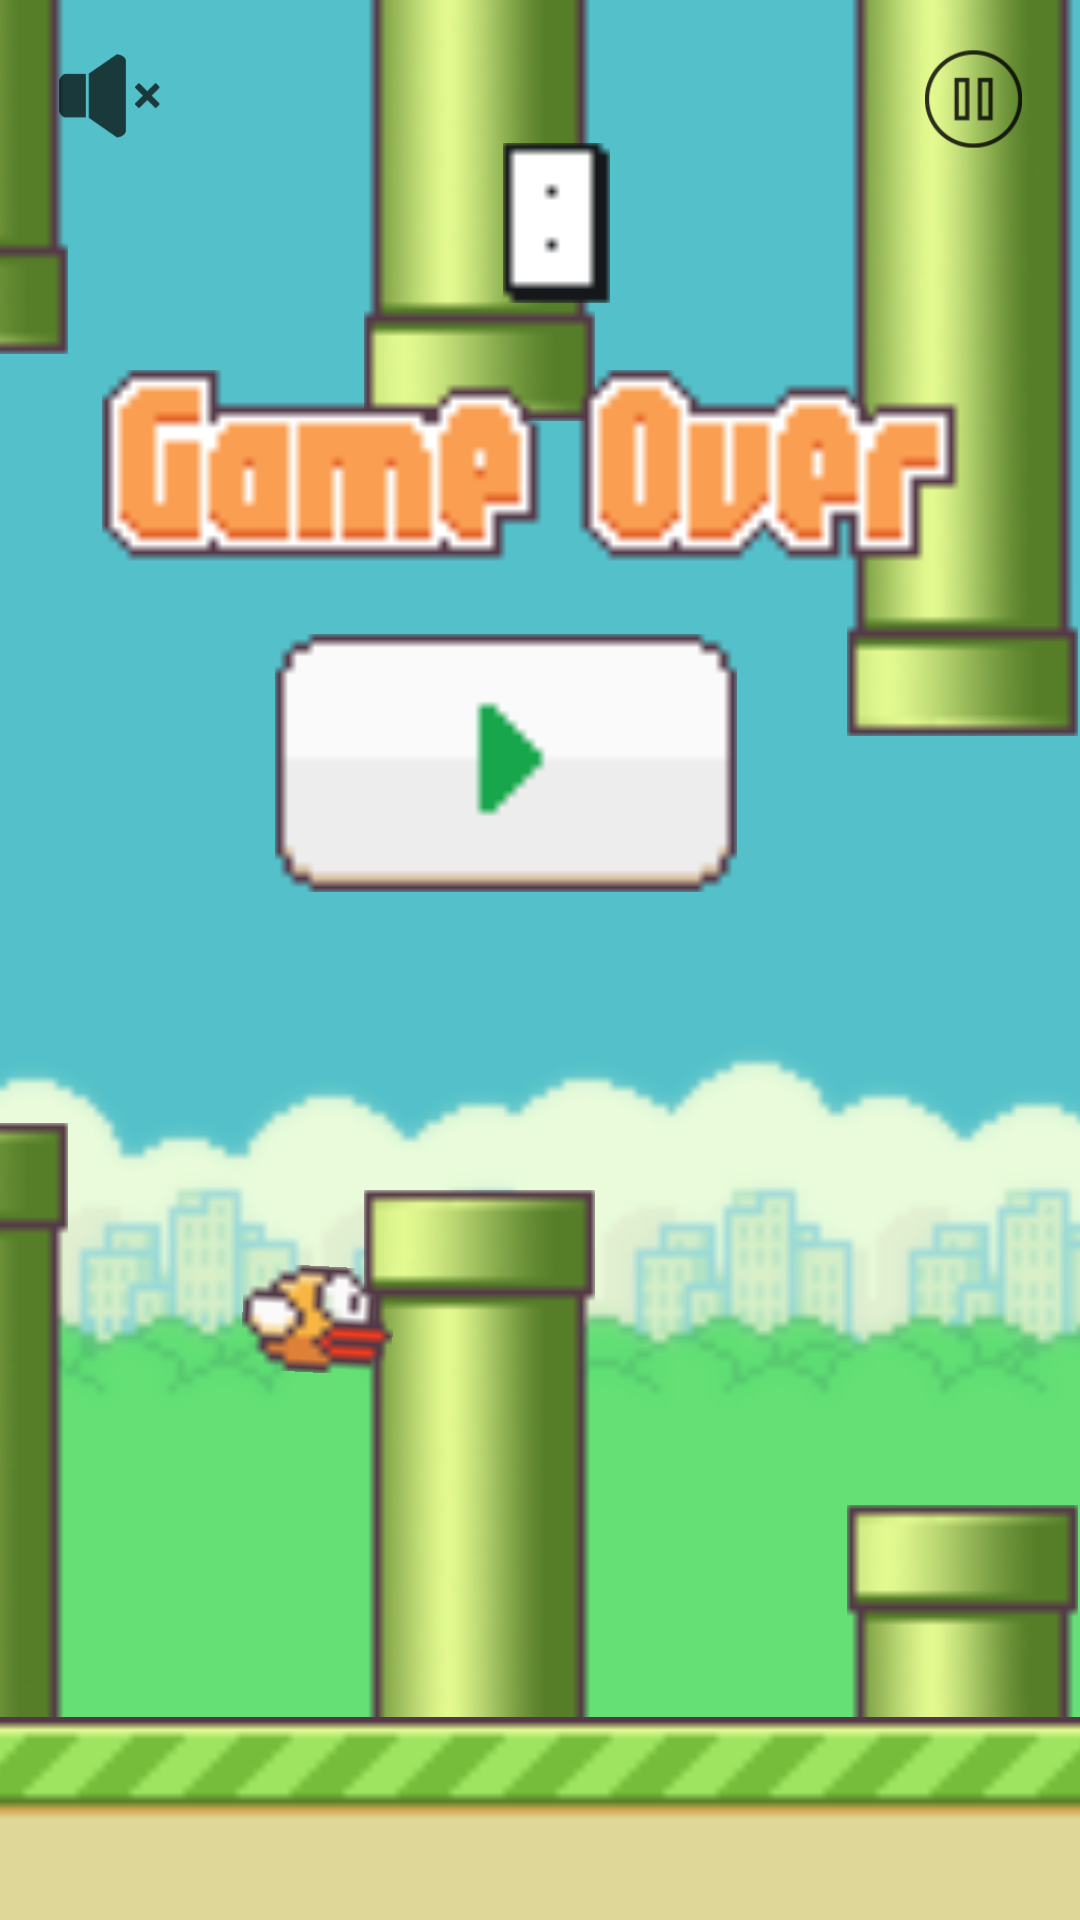 Angry Flappy Bird Apk Download for Android- Latest version 2.0.1-  gk.gkgamestudios.angryflappybirds